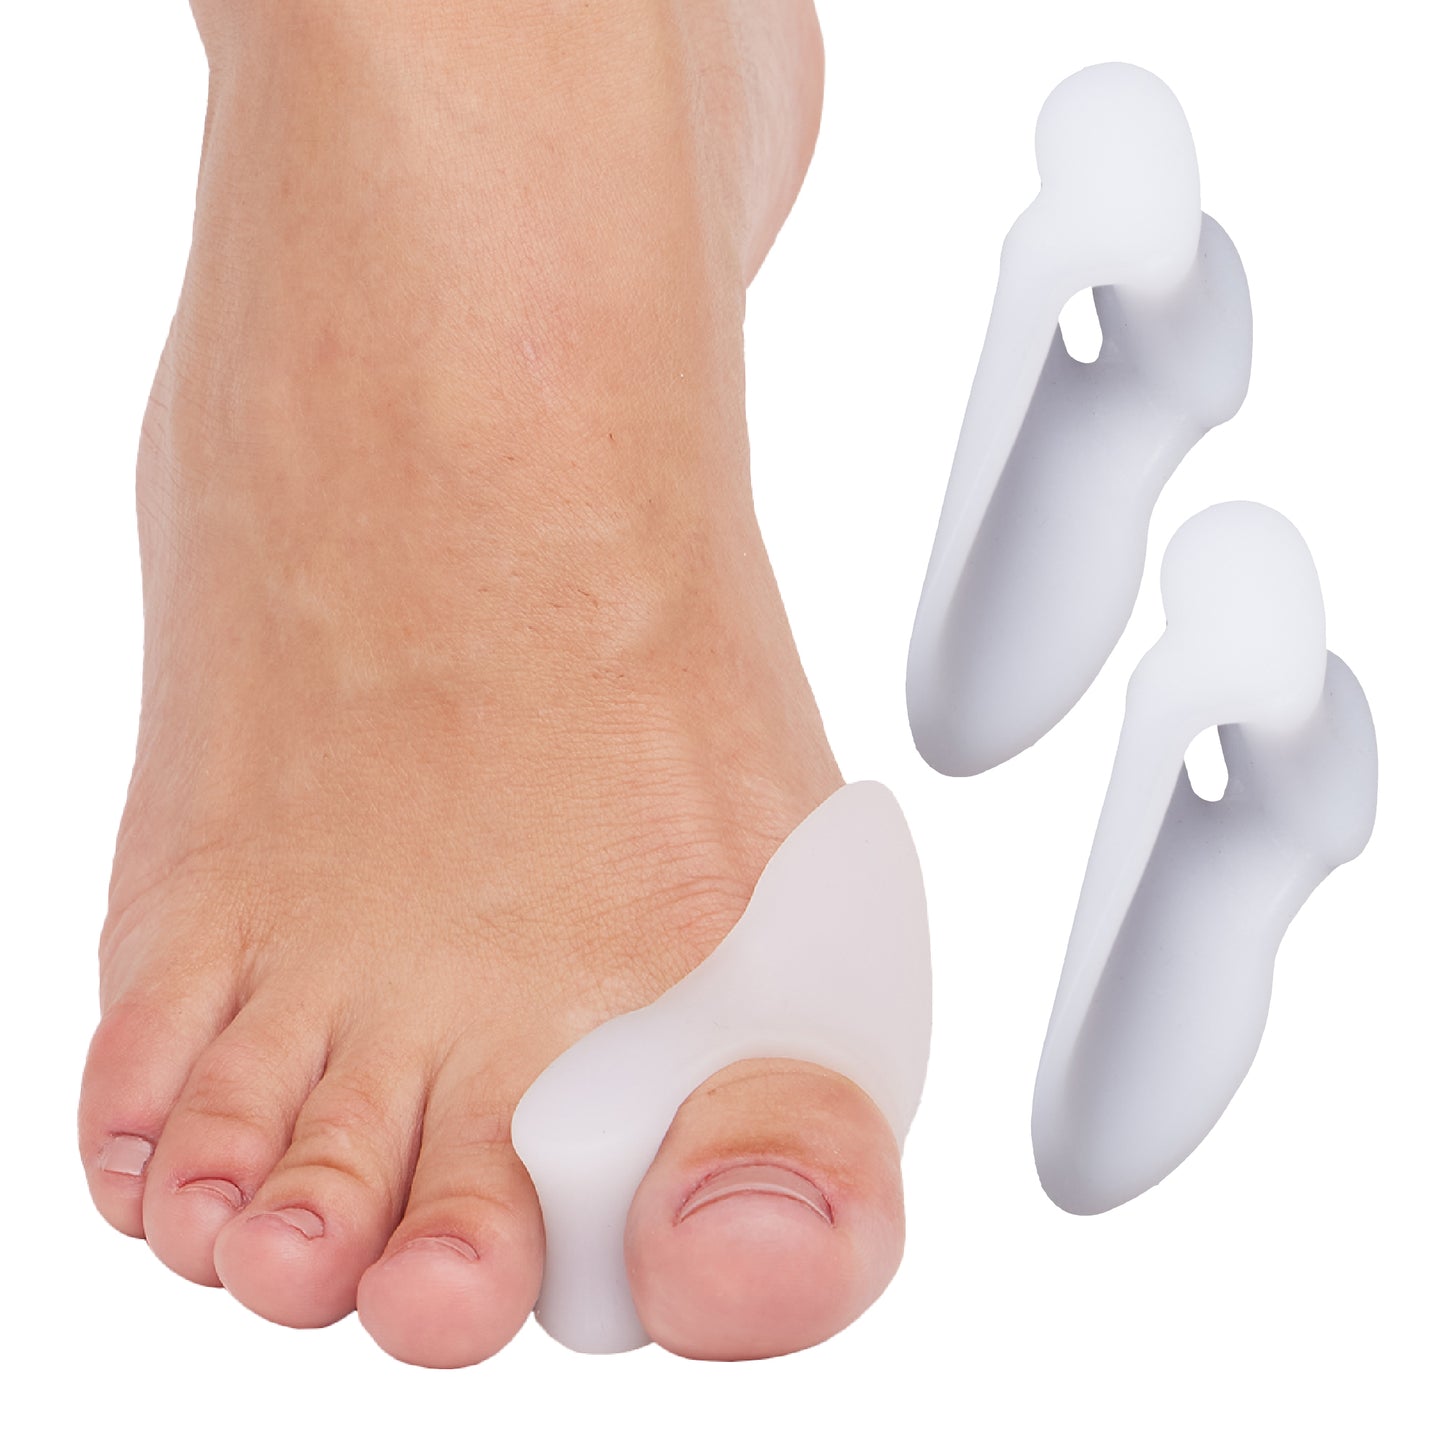 Bunion Protector with Toe Separator